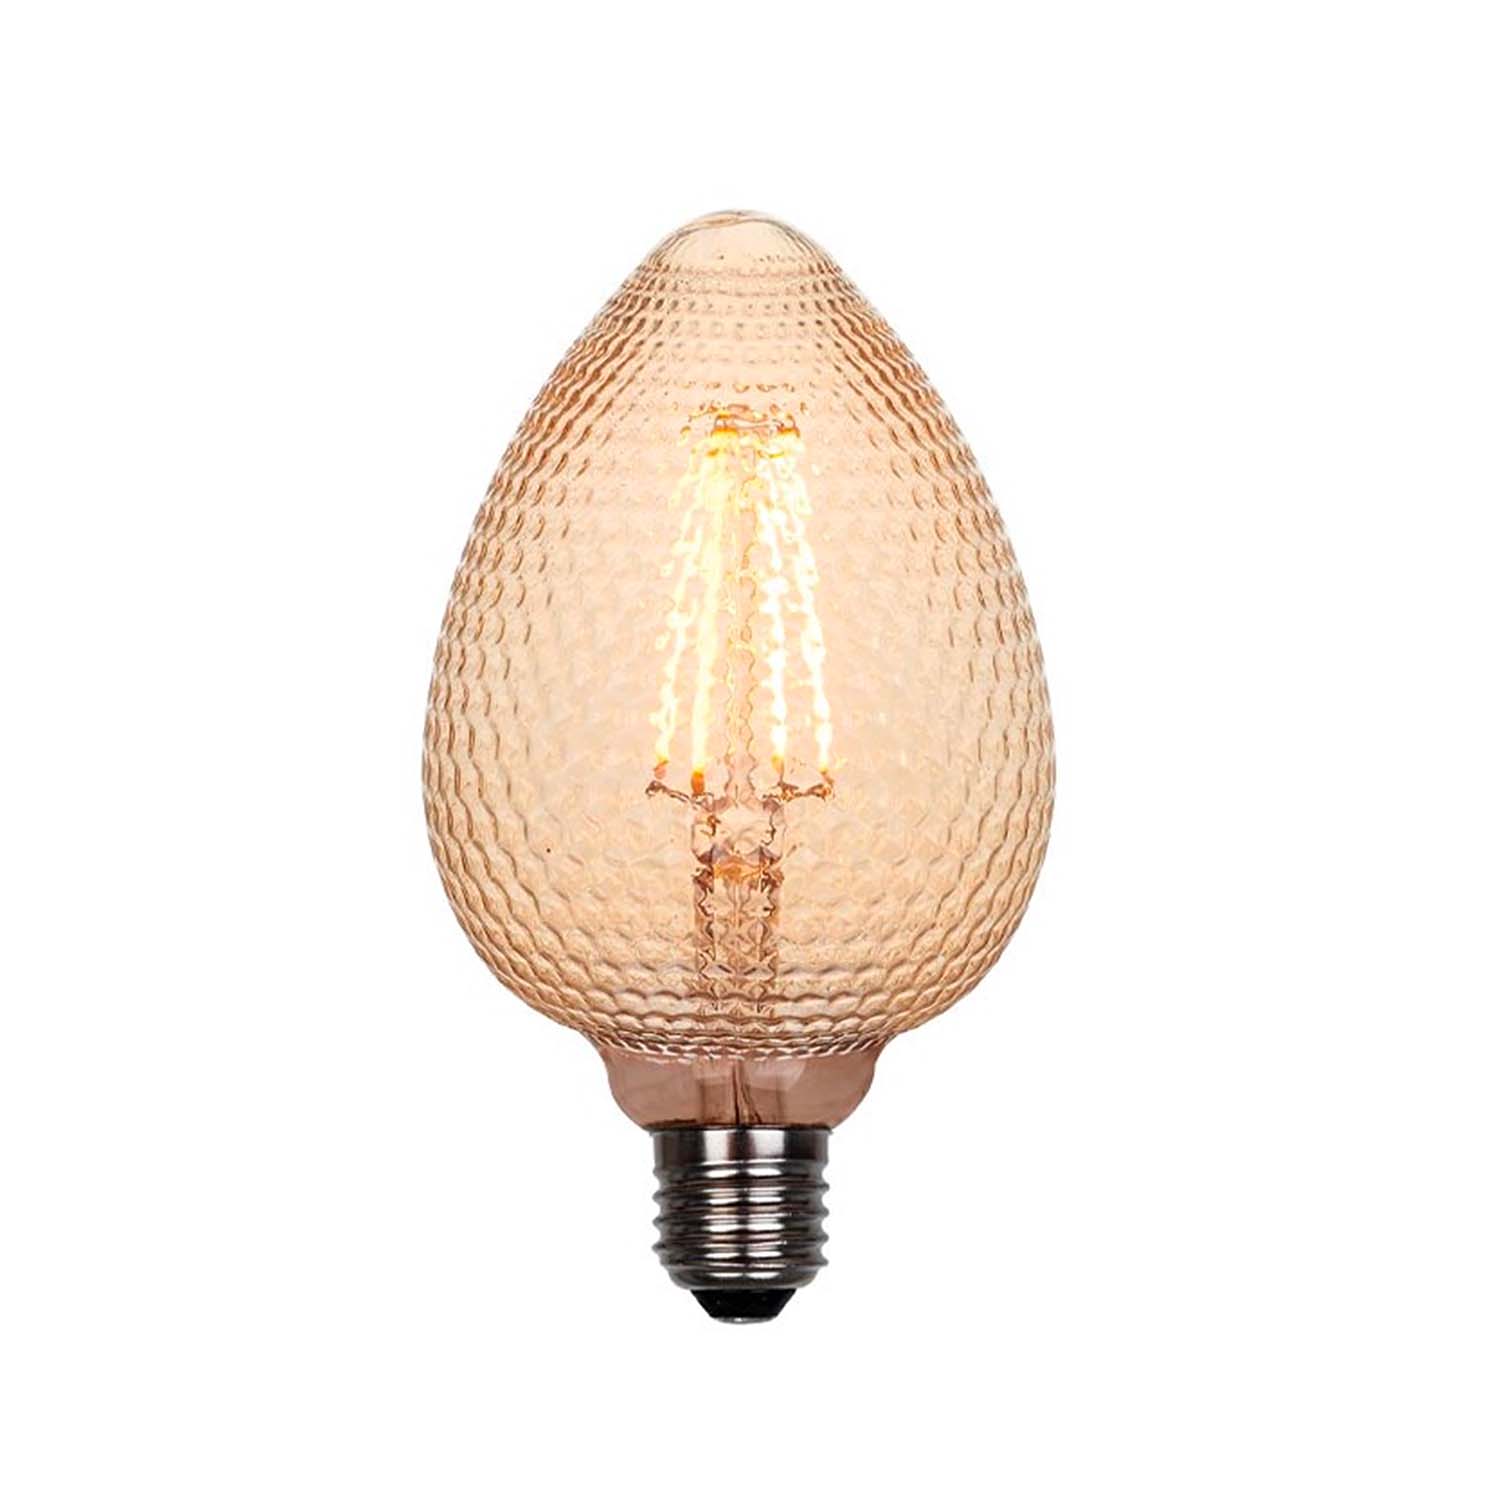 Facet Pine - E27 LED bulb in the shape of a pine cone